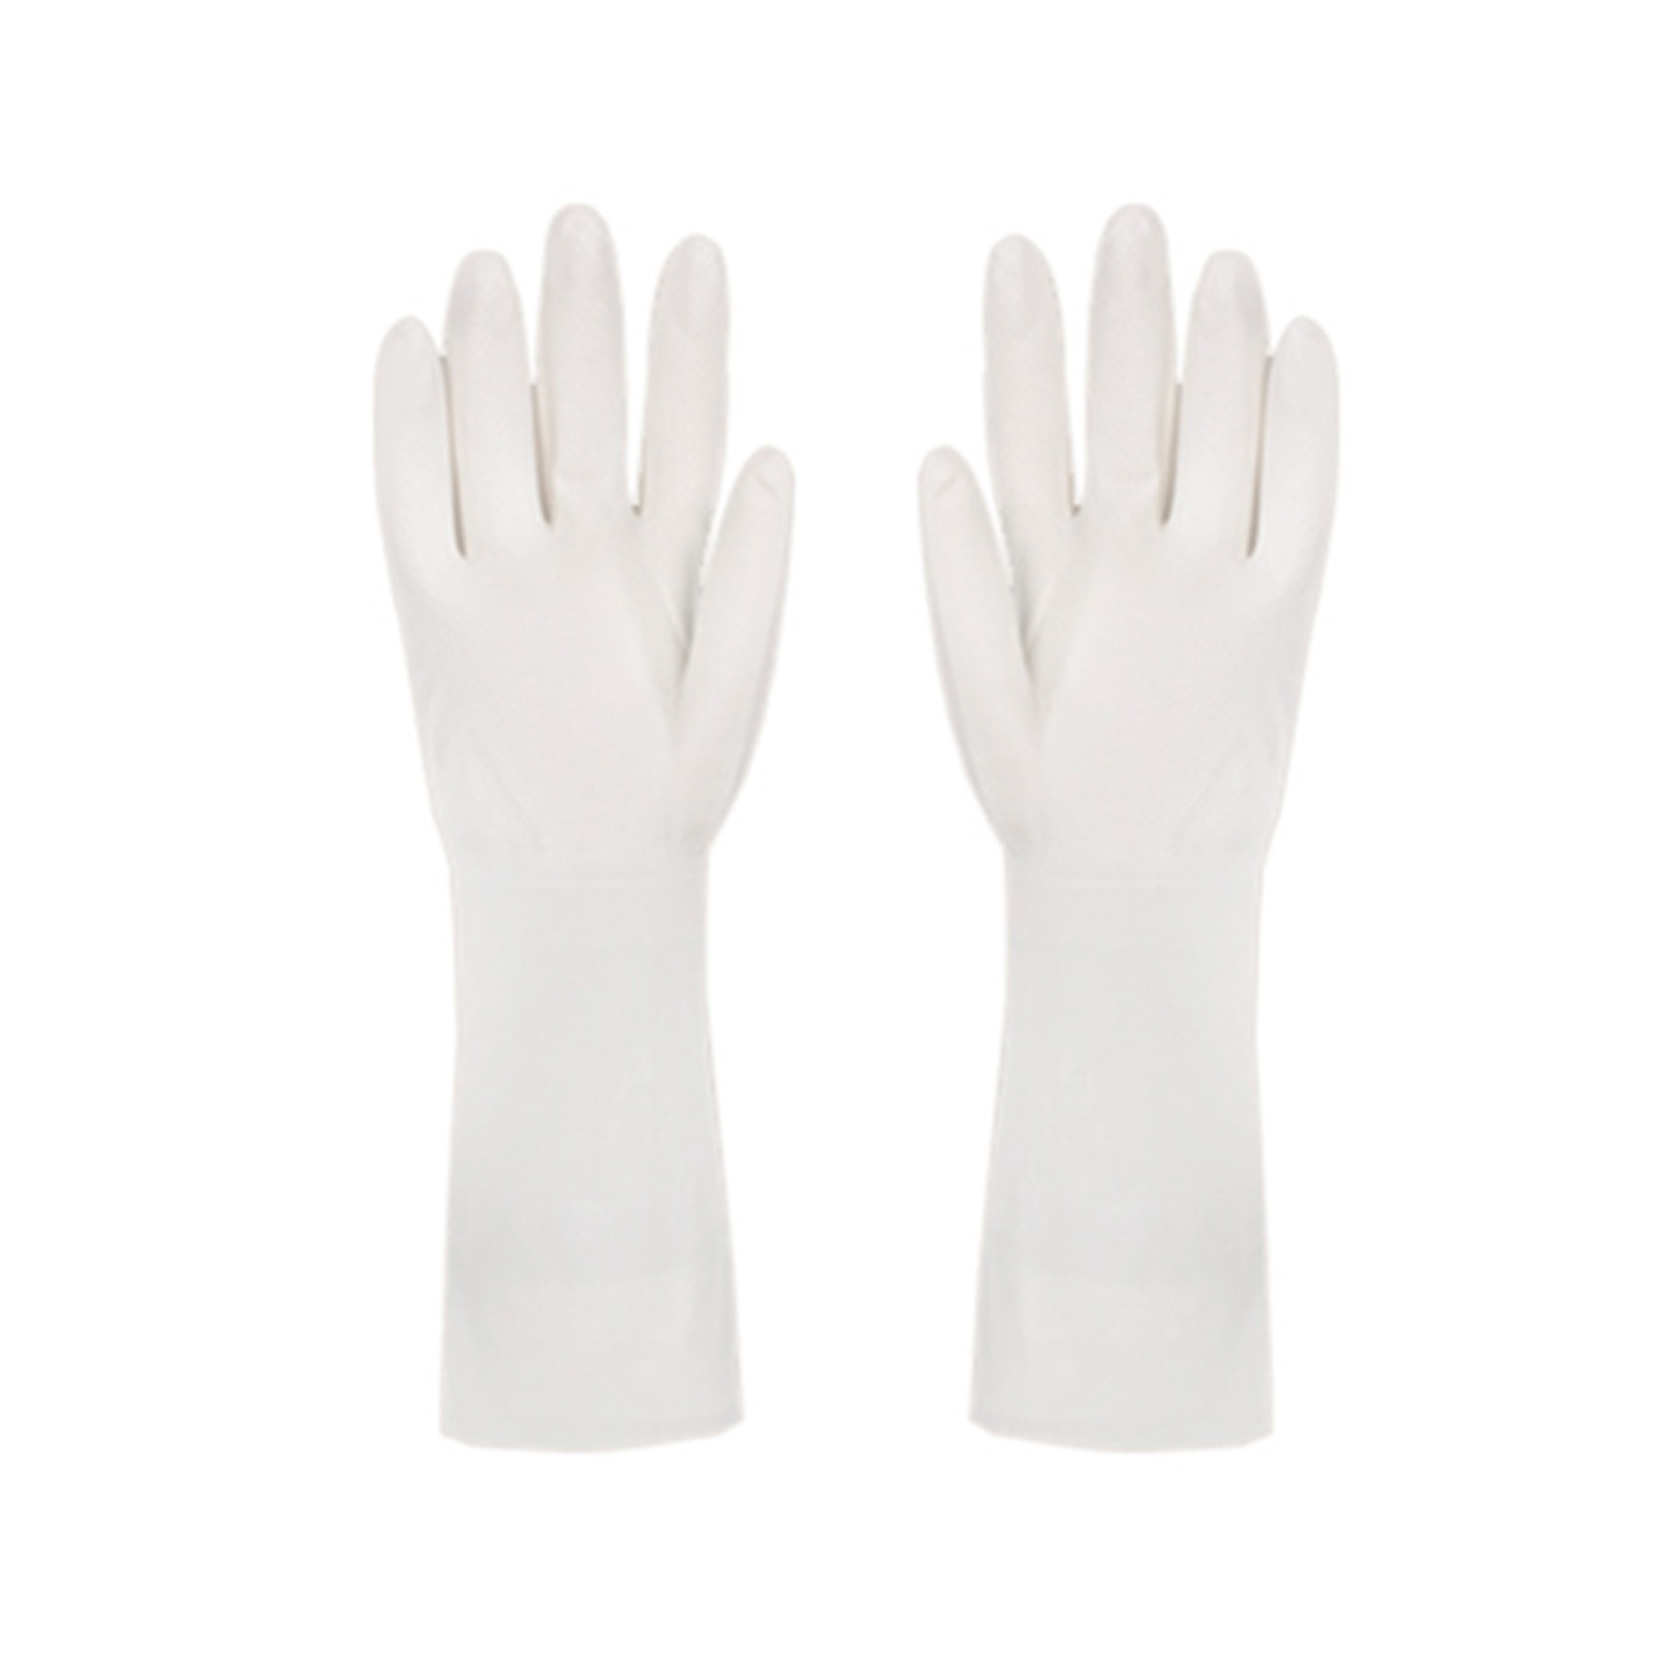 Rubber Nitrile Gloves Reusable Household Cleaning for Kitchen Dishwashing